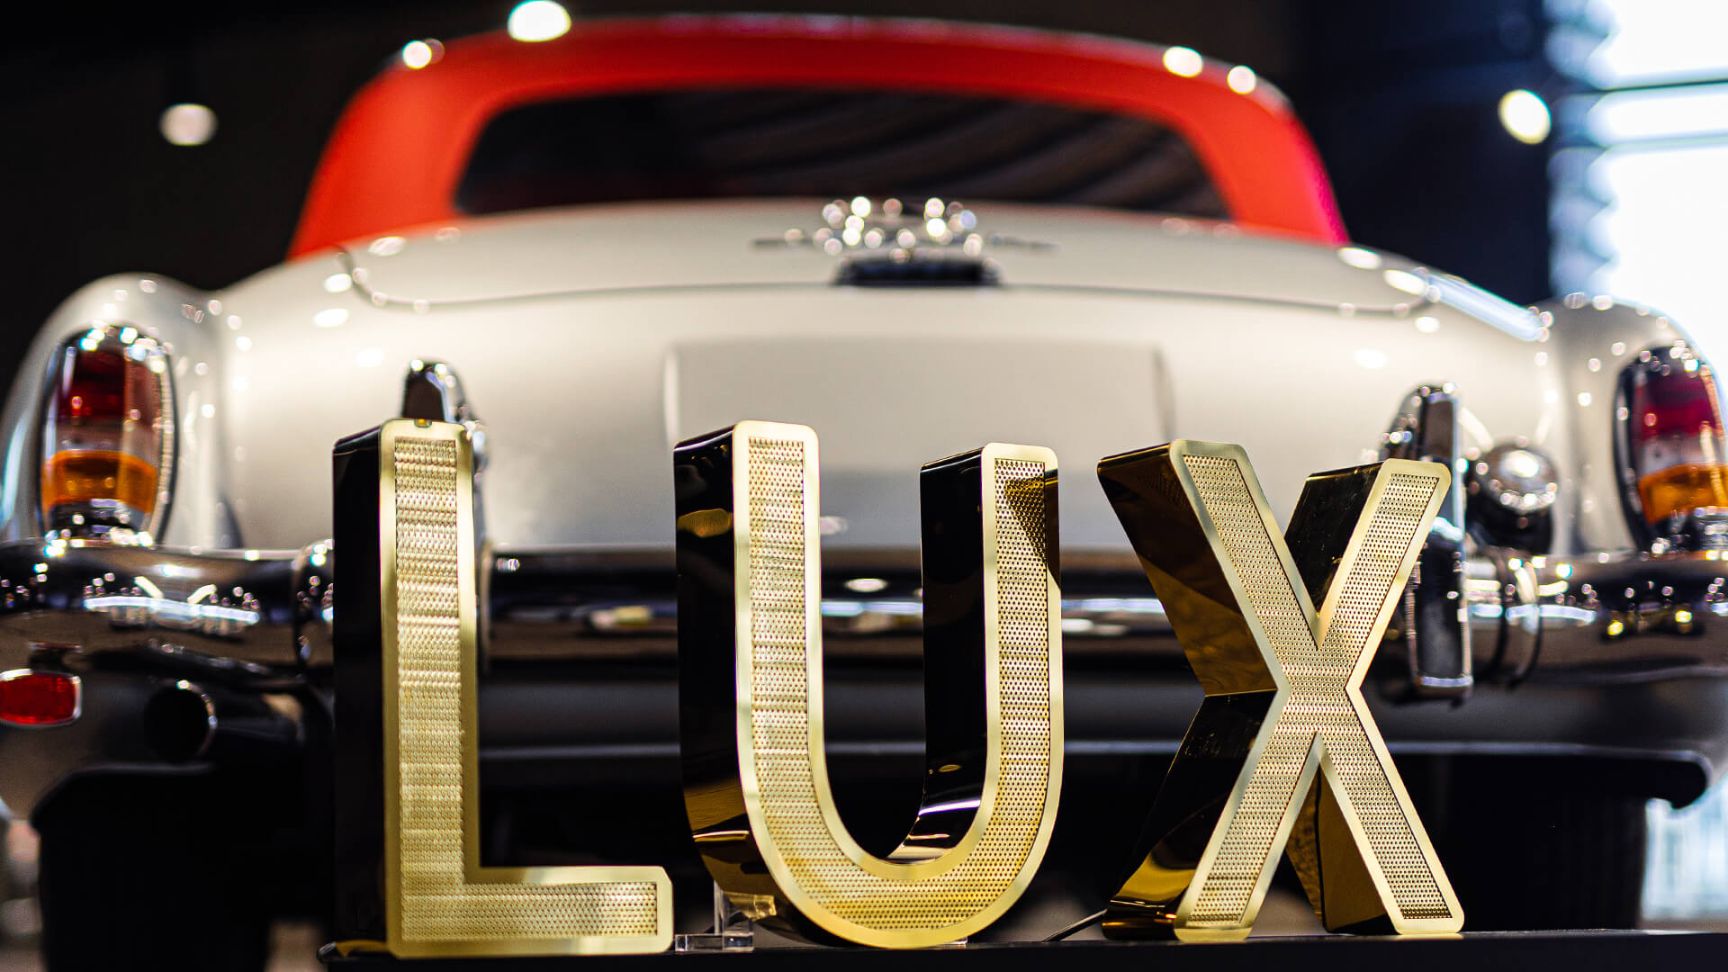 LUX perforated stainless steel letters - LUX inscription made of perforated stainless steel sheet, illuminated with LED, on the background of Mercedes